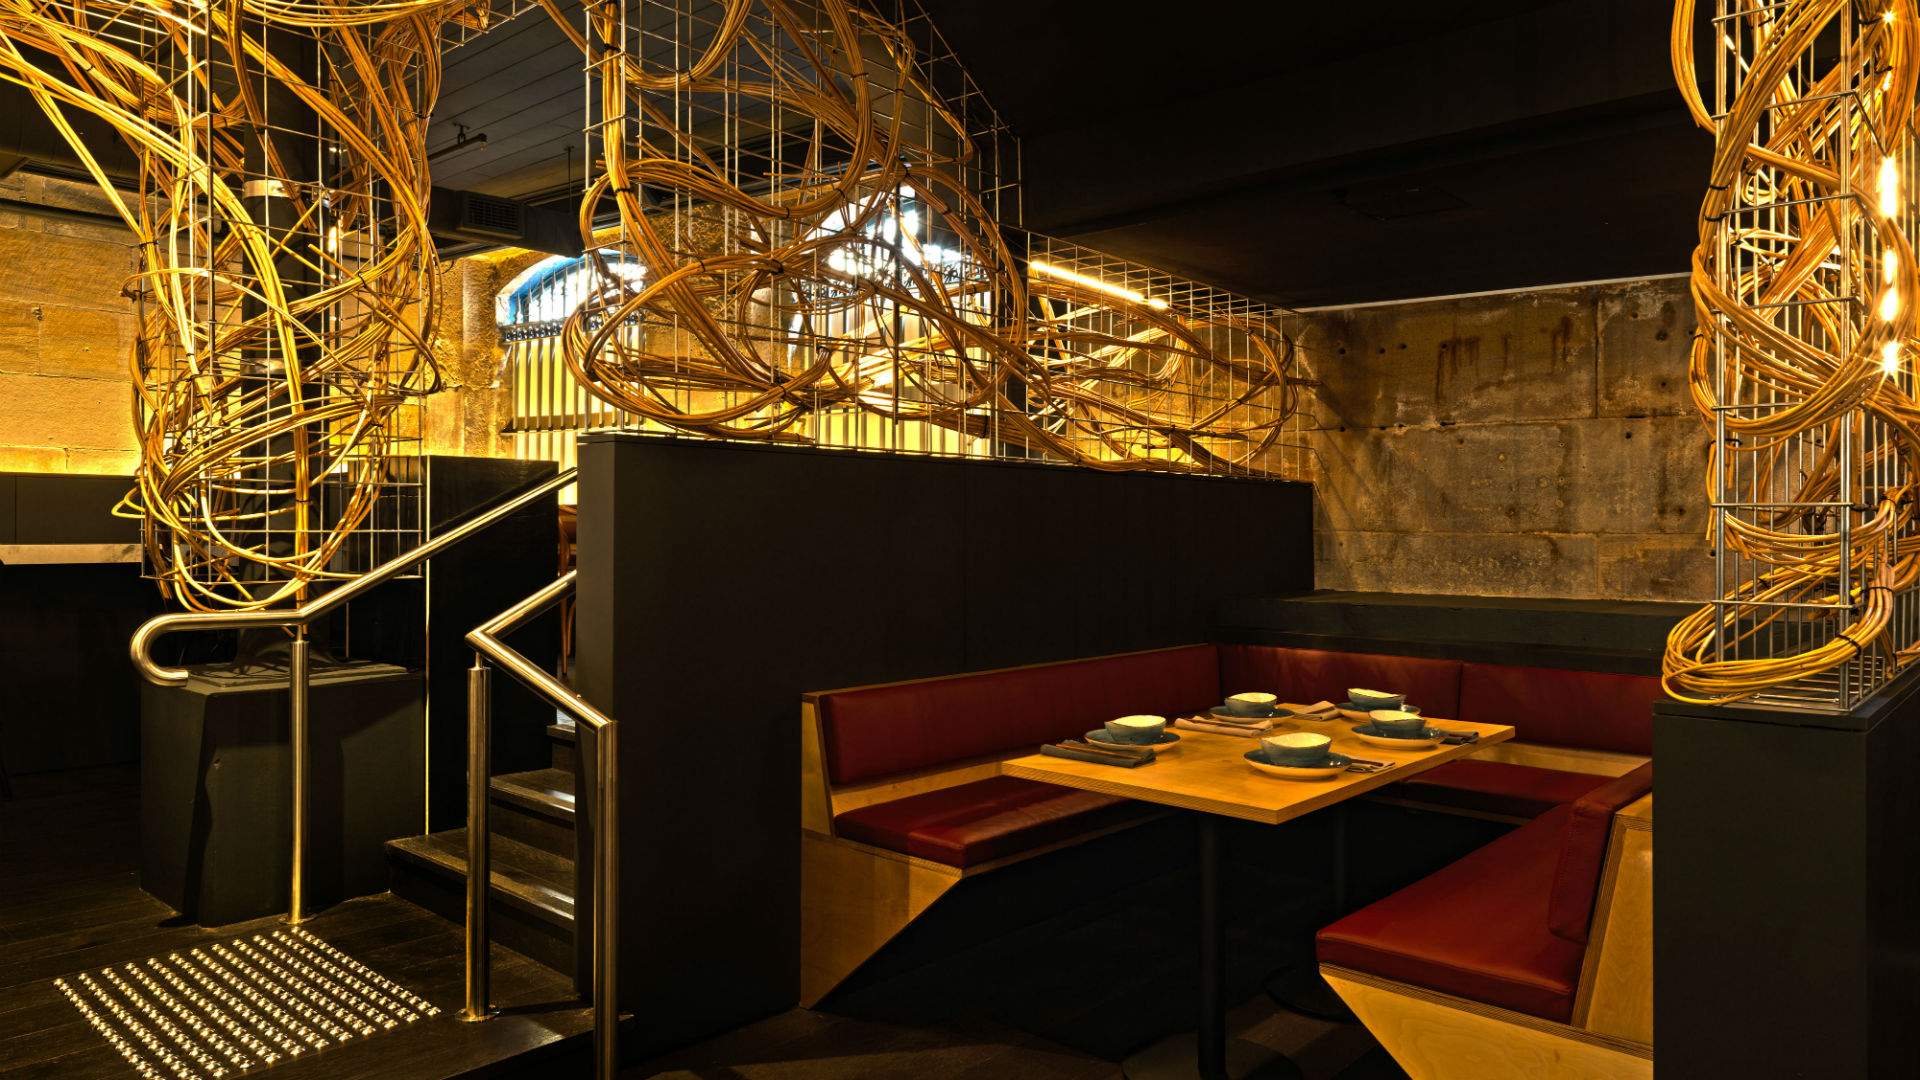 Forty Licks Is the CBD's New Underground Vietnamese Restaurant and Bar